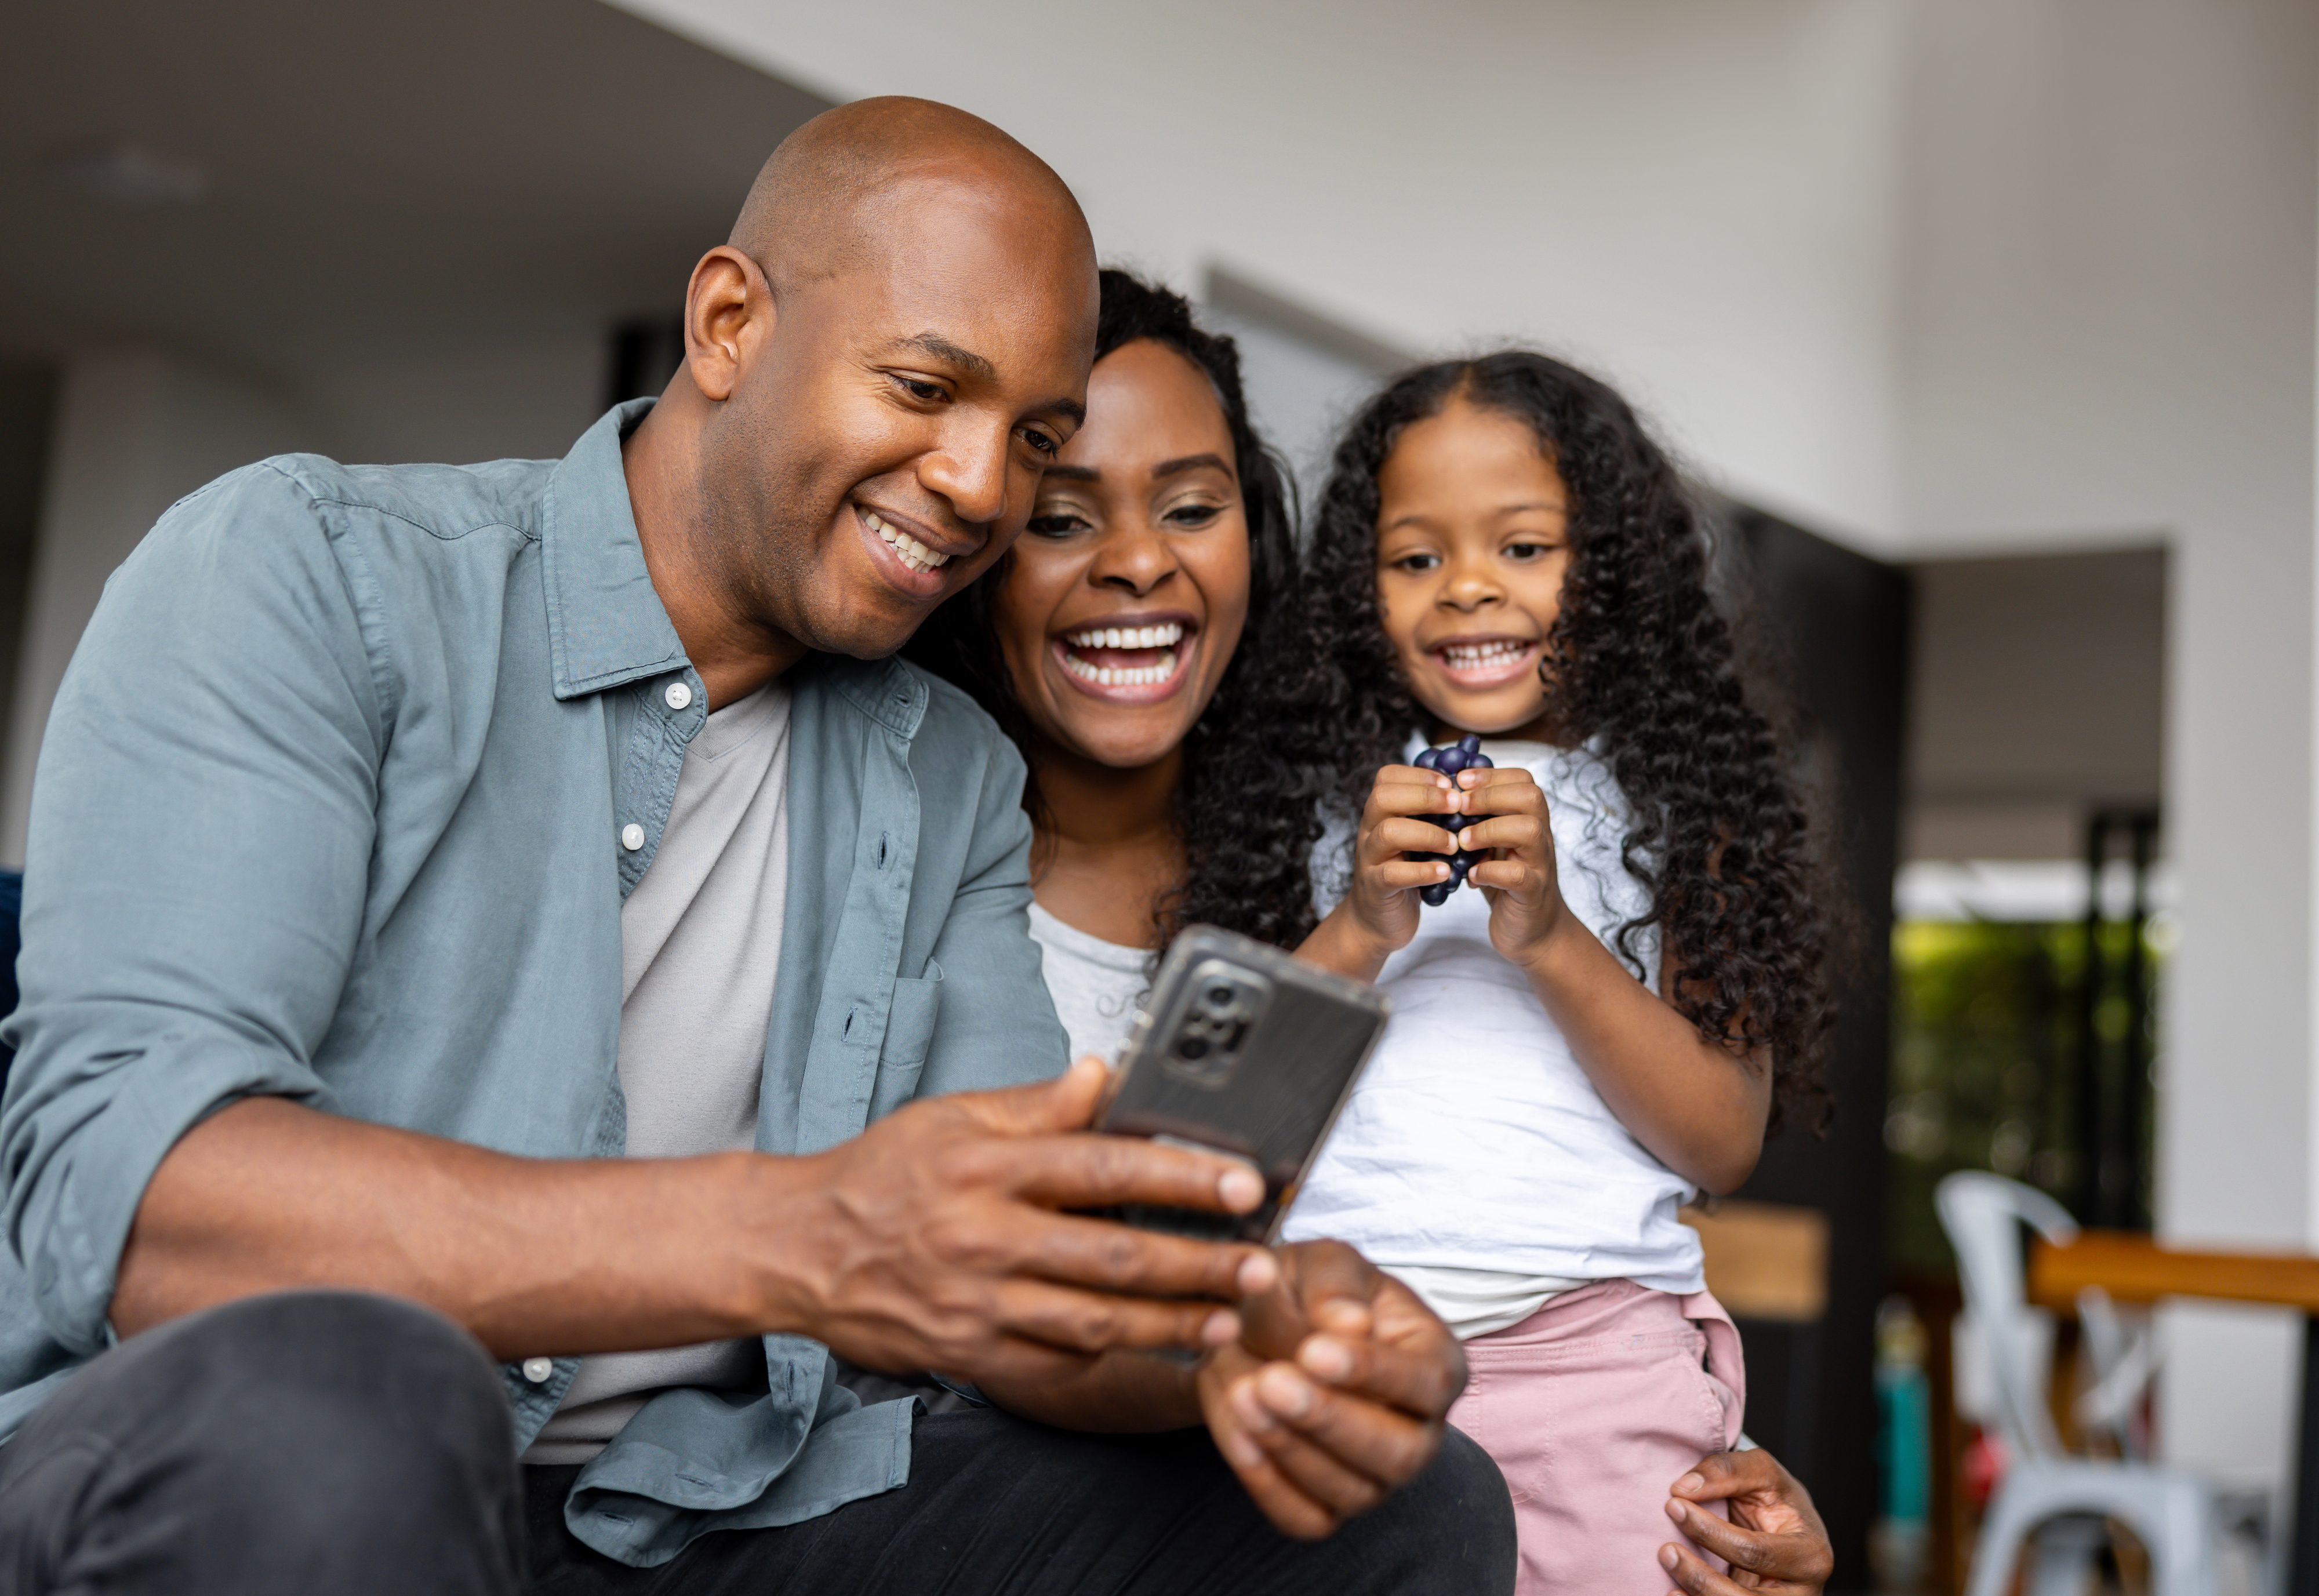 Family with child taking a selfie, showing joy and togetherness, in a home setting